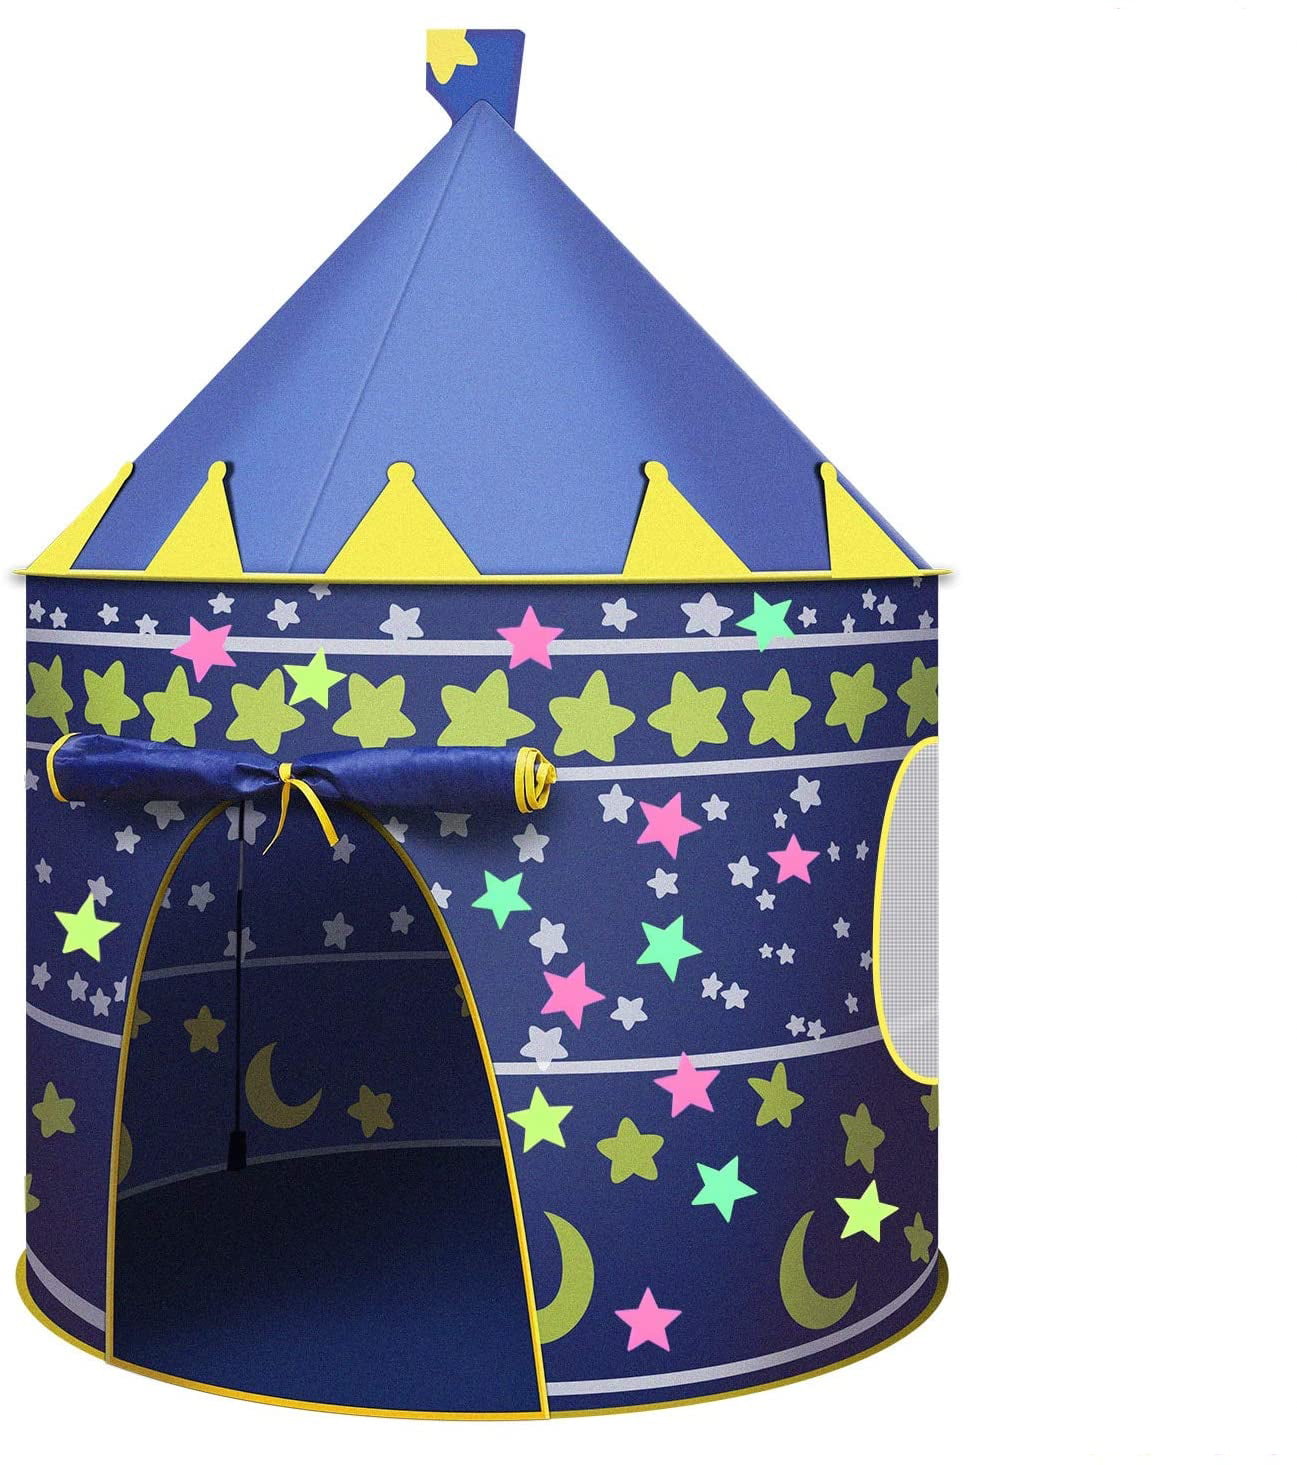 Castle Kids Play Tent Beach Summer Tent Camp Shelter For Outdoor Playhouse 